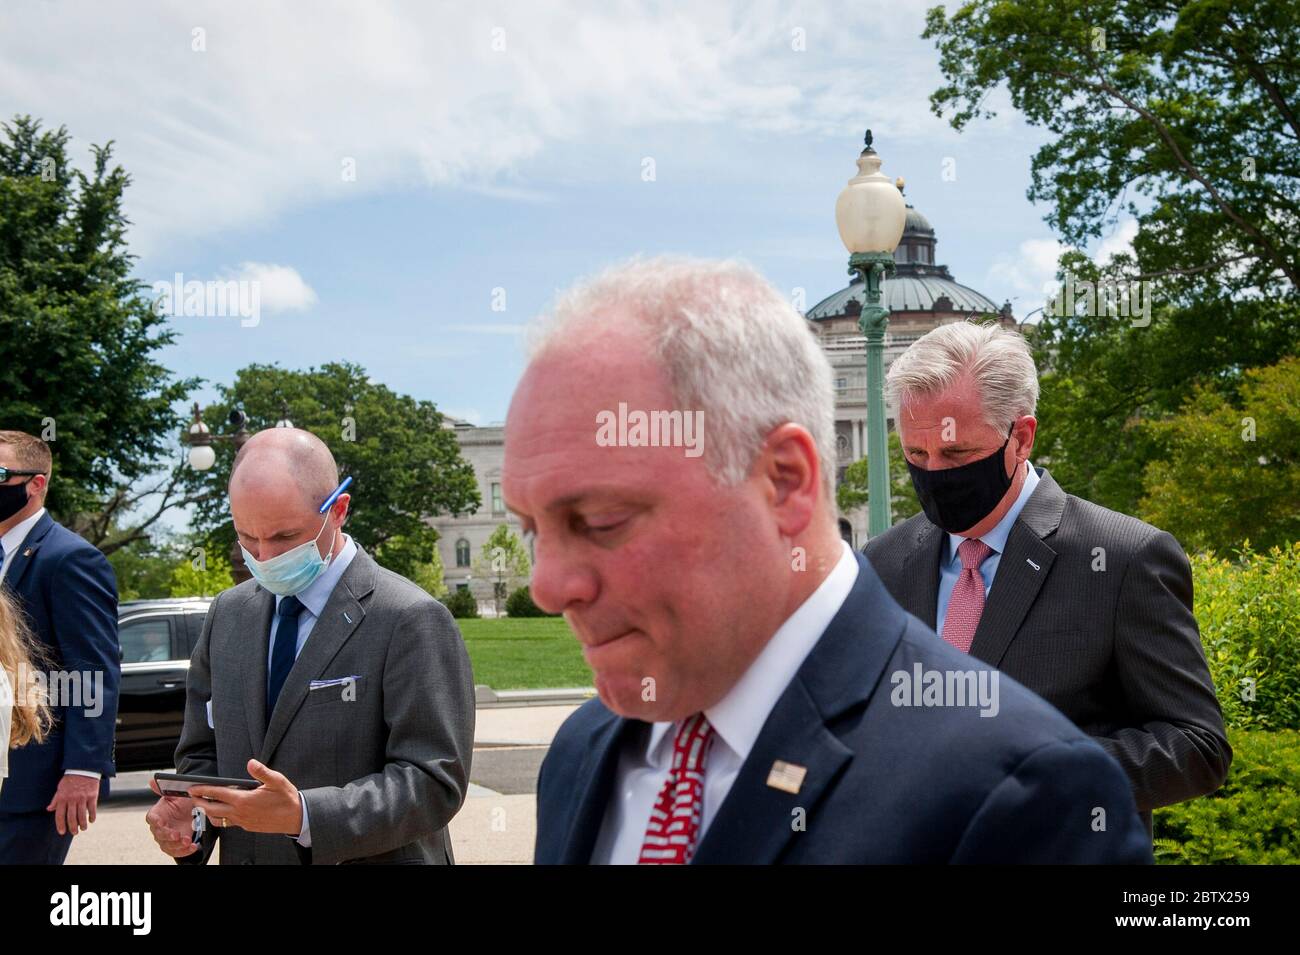 House Minority Leader Rep. Kevin McCarthy (R-Calif.) wears his face mask following a media availability with House Minority Whip Rep. Steve Scalise (R-LA), House GOP Conference Chairwoman Liz Cheney (R-WY) and others, to announce that Republican leaders have filed a lawsuit against House Speaker Nancy Pelosi and congressional officials in an effort to block the House of Representatives from using a proxy voting system to allow for remote voting during the coronavirus pandemic, outside of the U.S. Capitol in Washington, DC., Wednesday, May 27, 2020. Credit: Rod Lamkey/CNP | usage worldwide Stock Photo